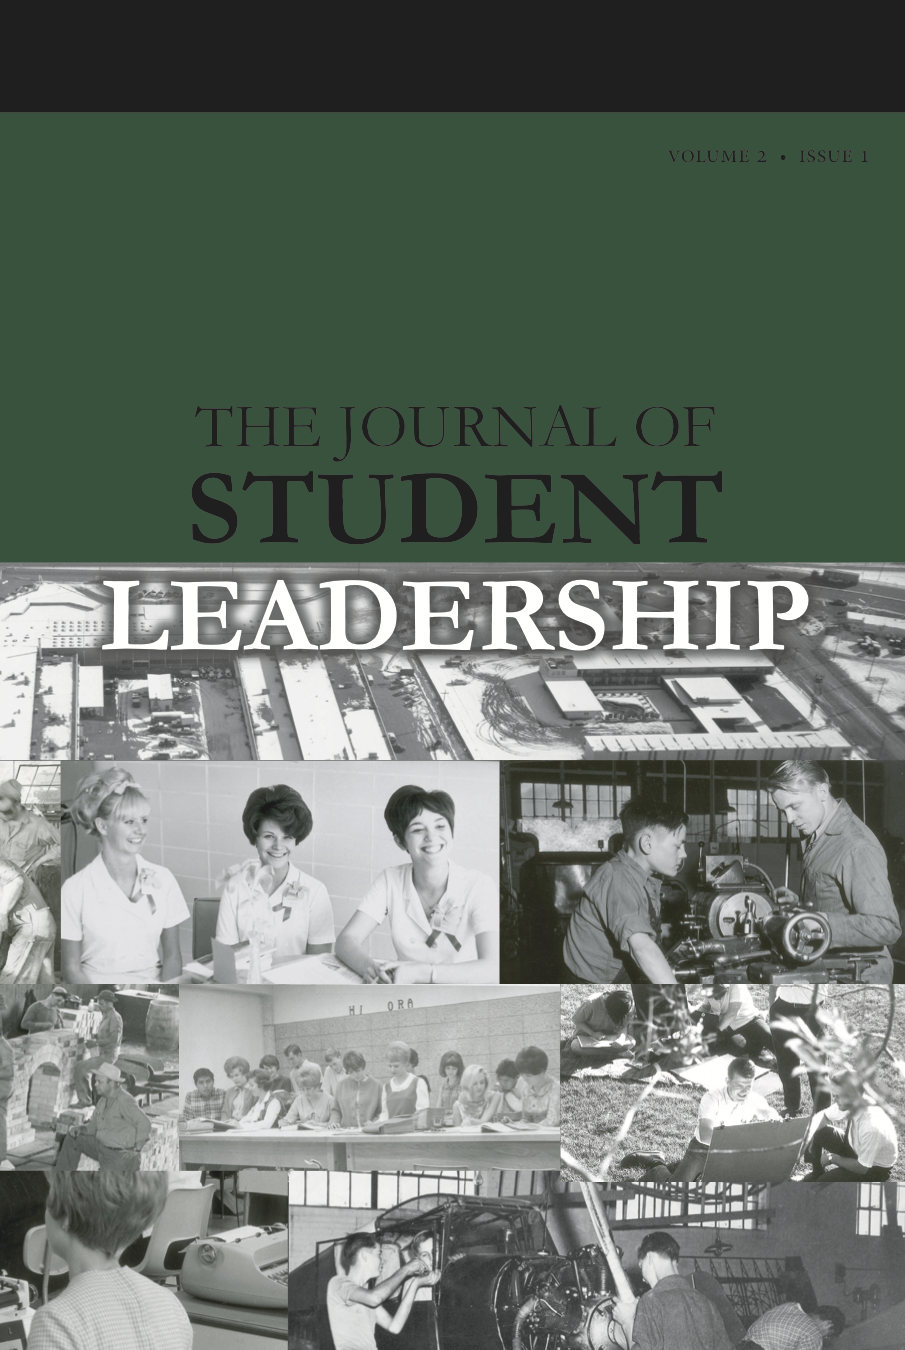 					View Vol. 2 No. 1 (2018): The Journal of Student Leadership
				